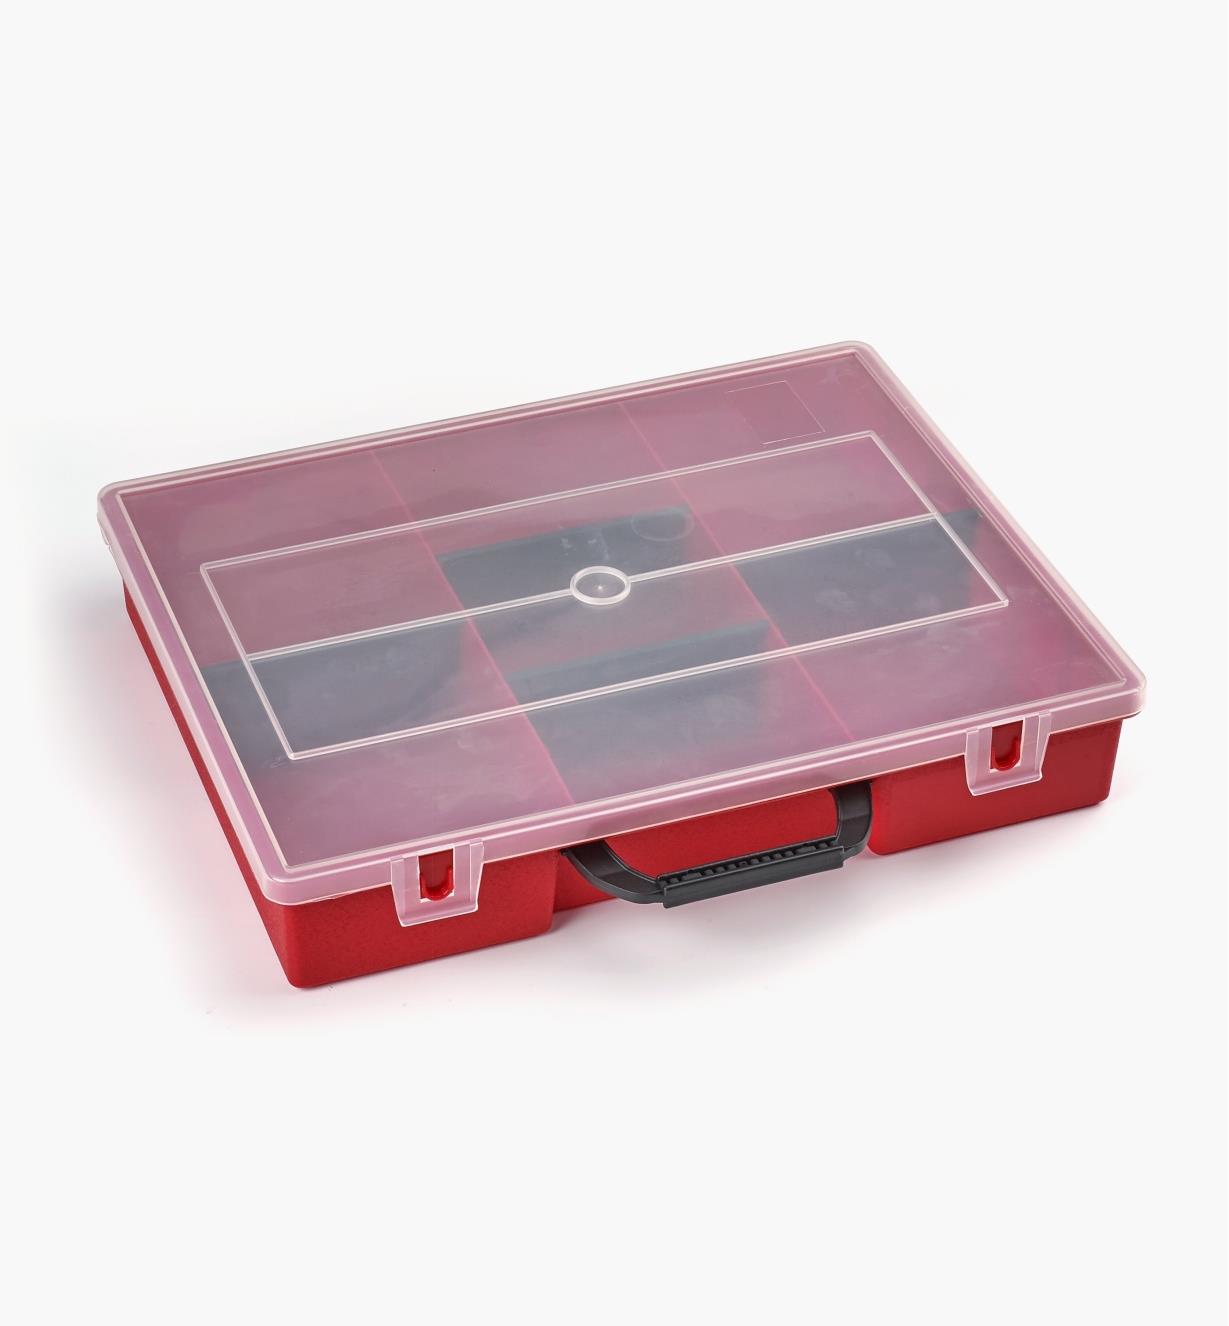 68K4373 - Tanos Storage Case with Dividers